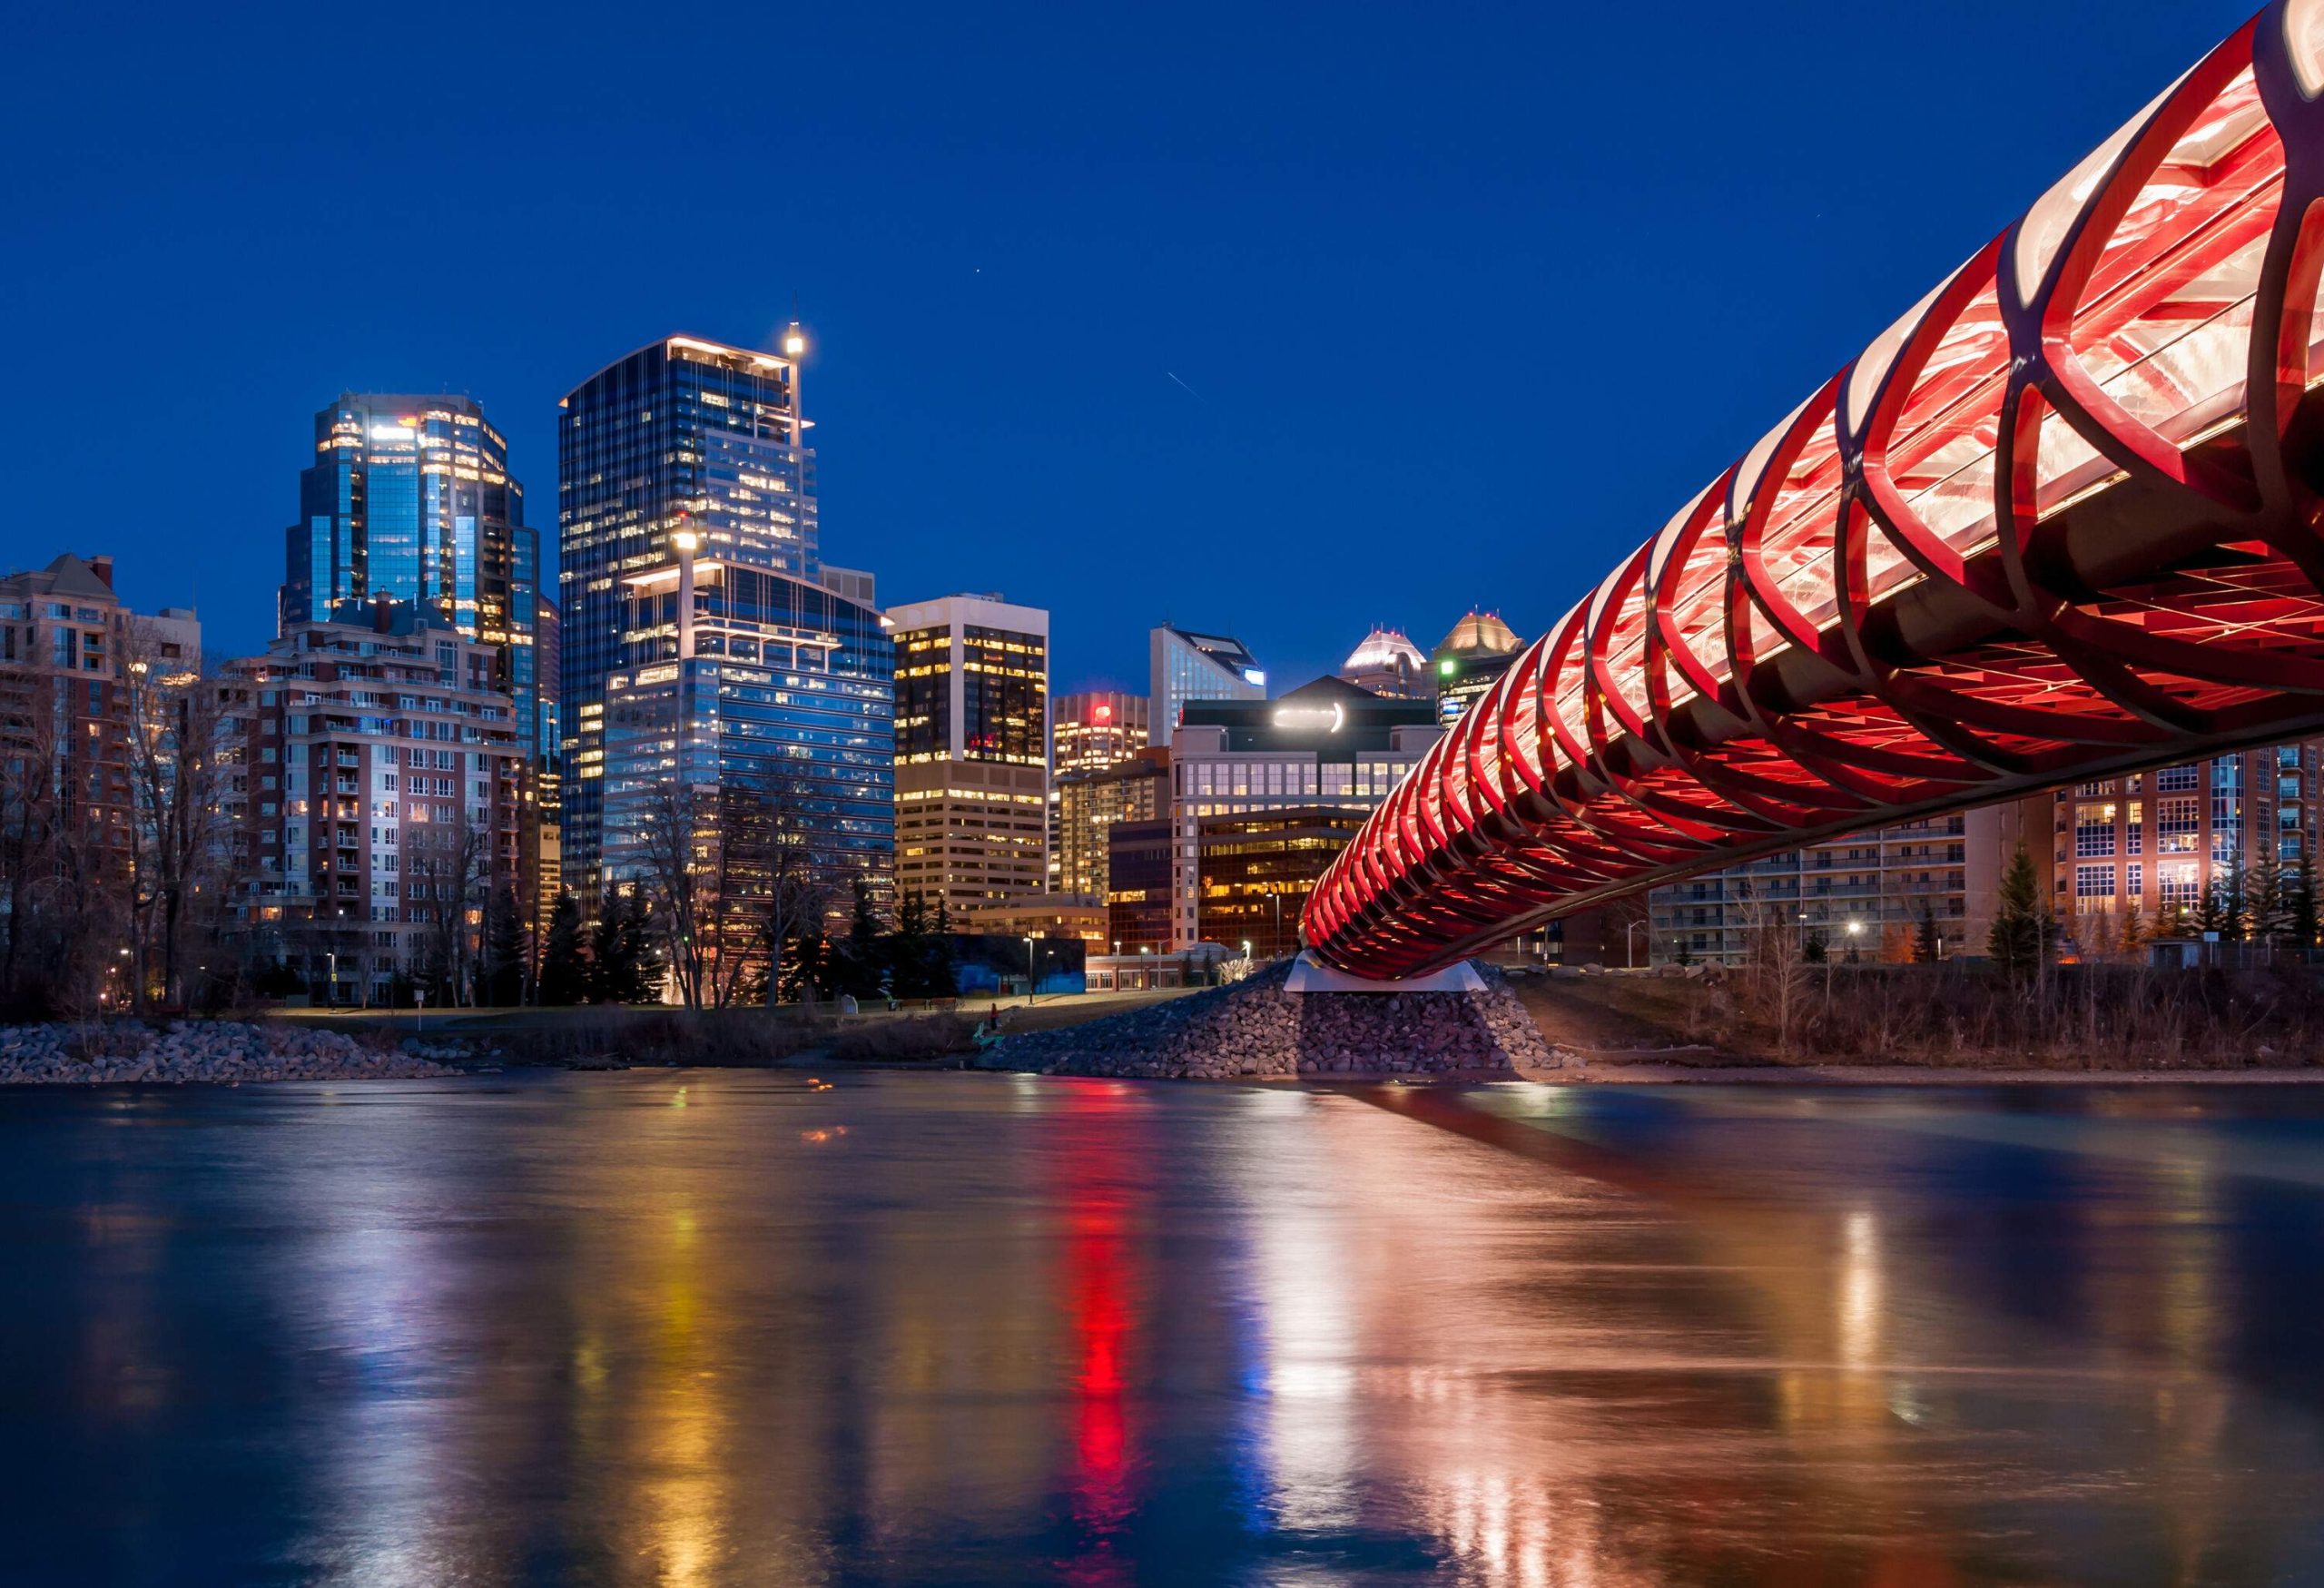 A modern pedestrian bridge spanning over the river overlooking the brightly lit skyline with towering buildings captured at night.